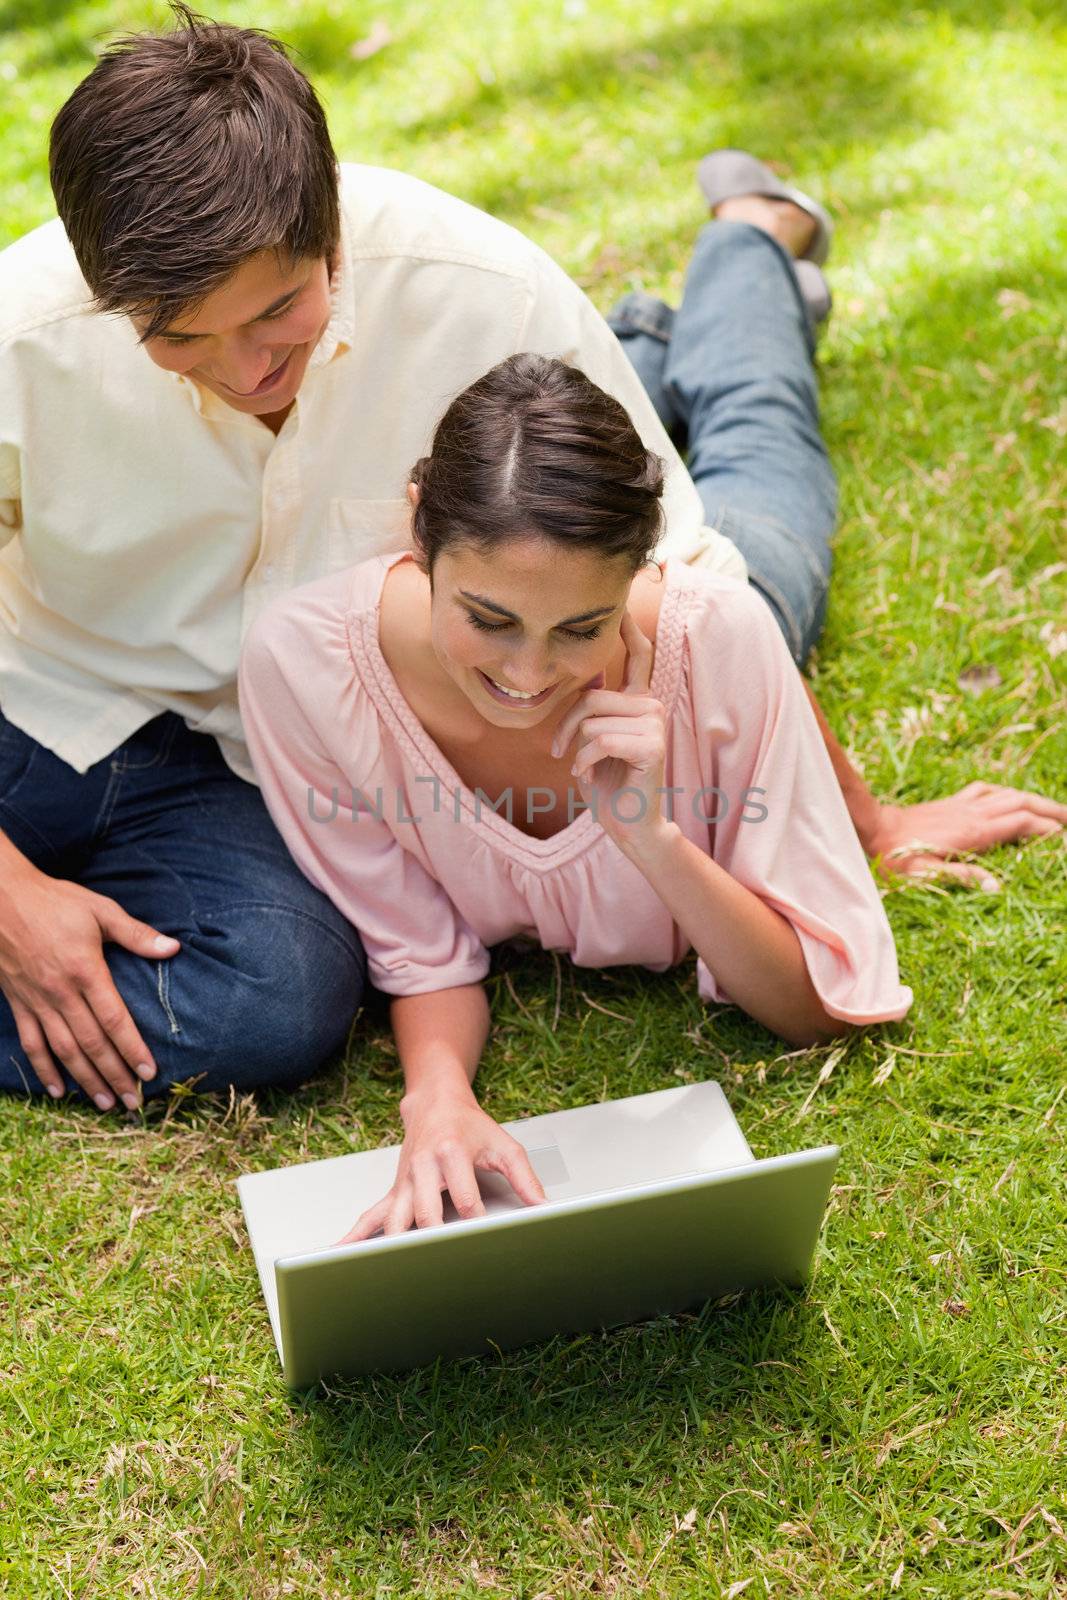 Woman resting her face against her hand while using a silver laptop with her friend sitting next to her on the grass